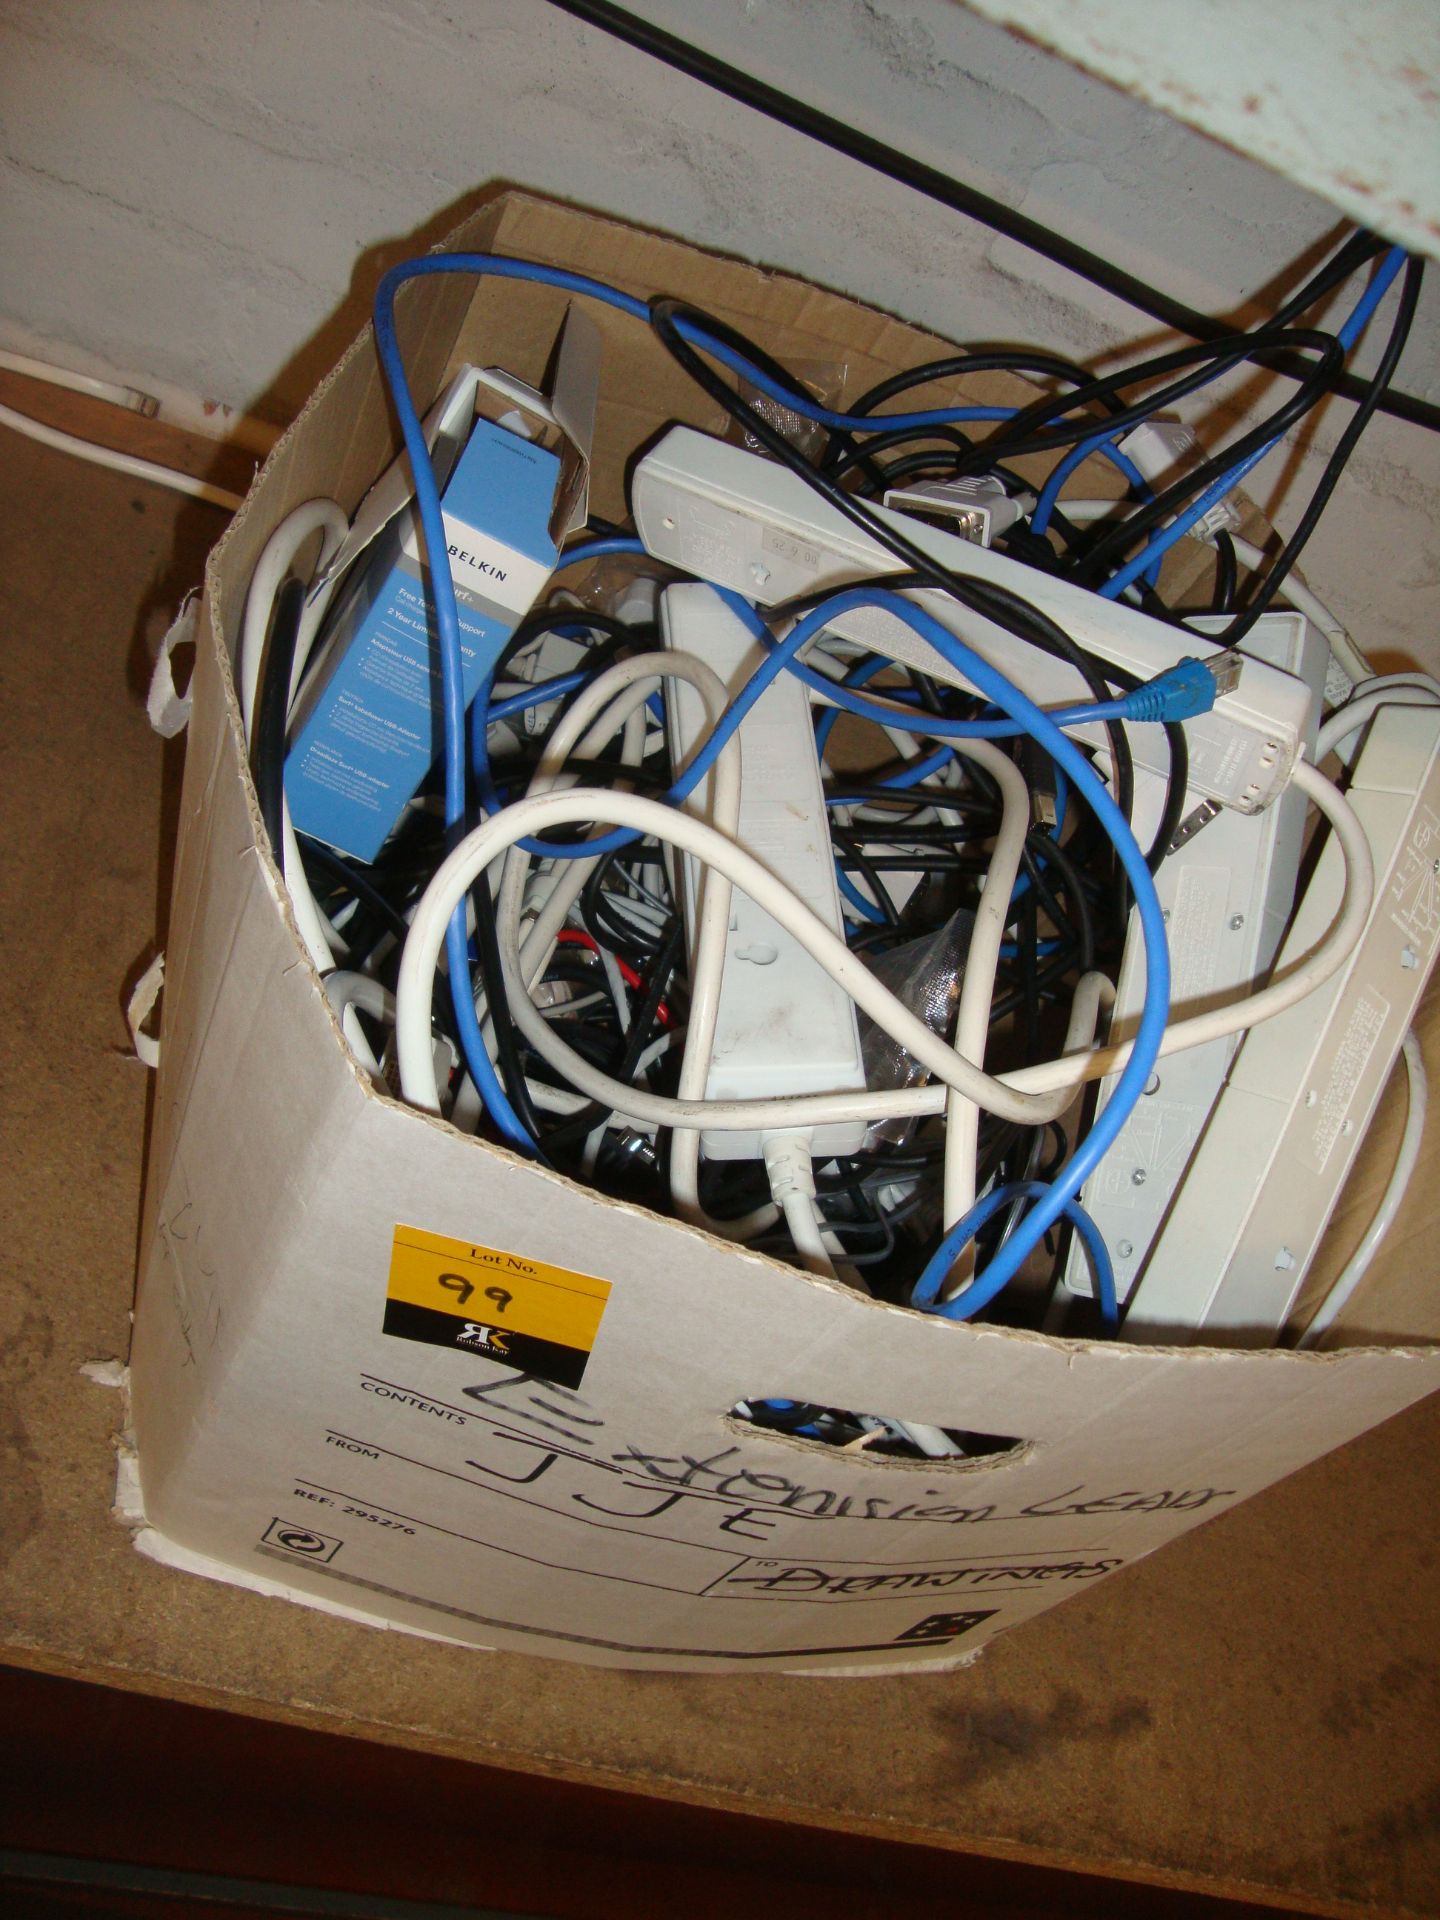 Quantity of electrical extension leads, computer cables and other related items